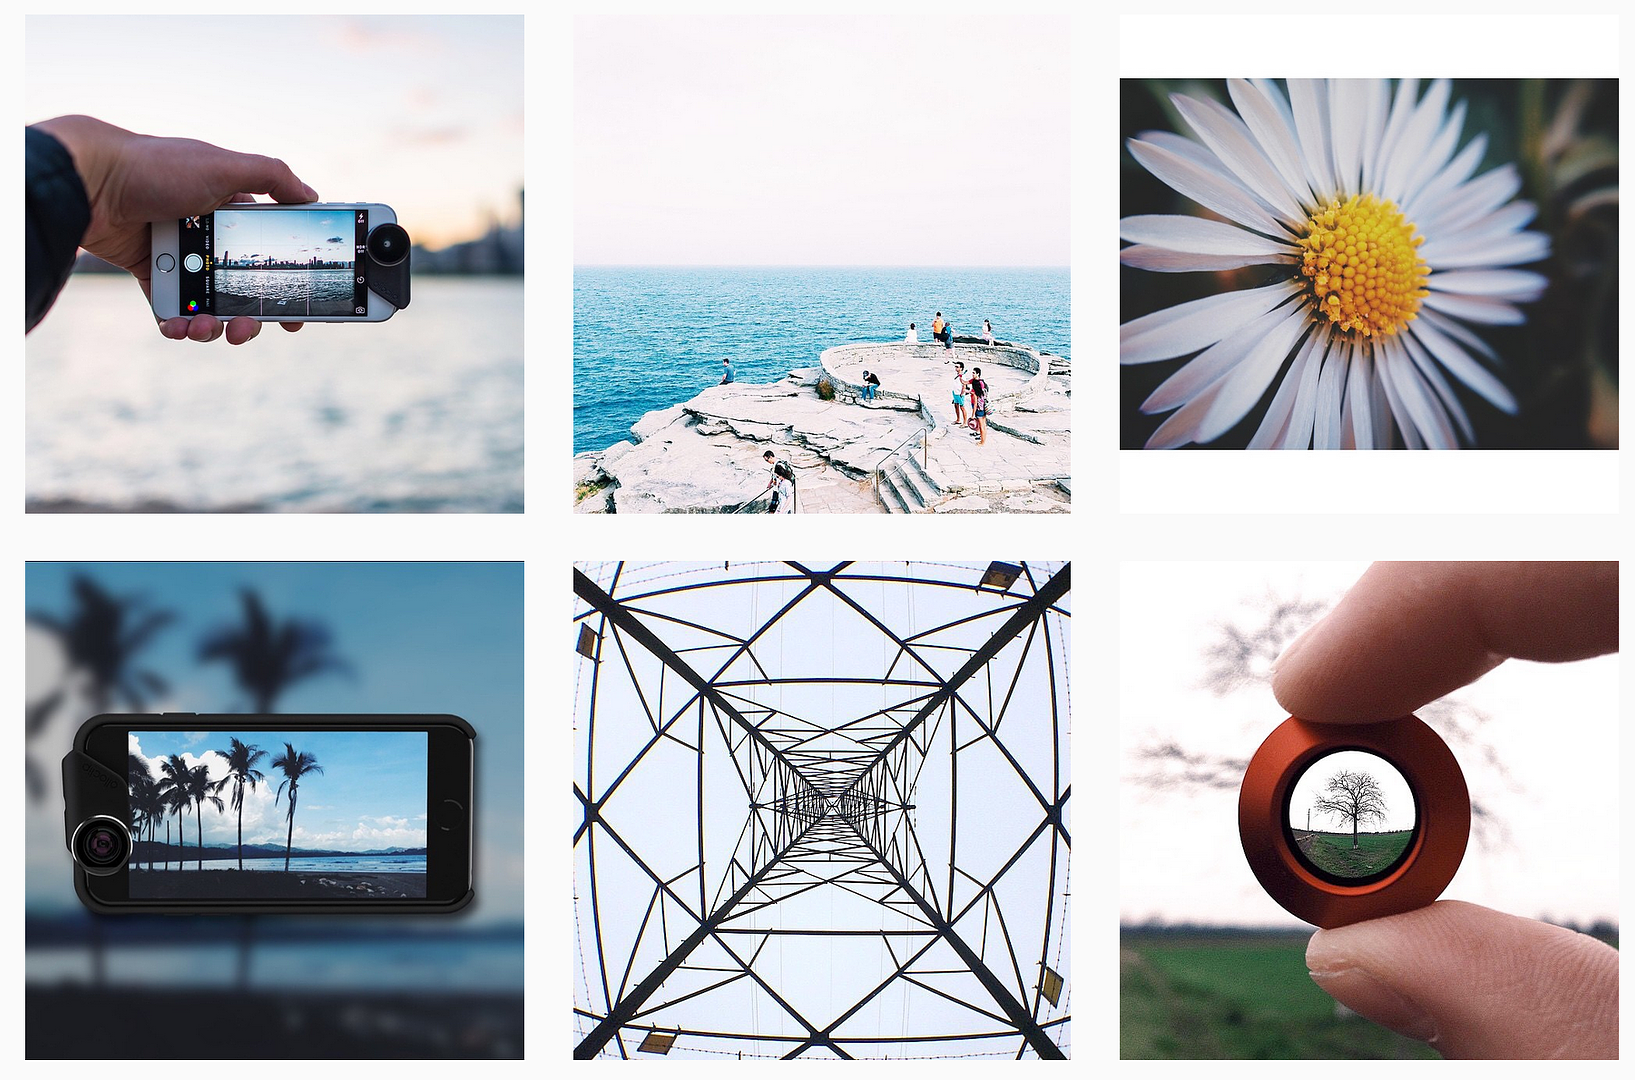 Olloclip Instagram feed: Great iPhone shots and photo inspiration with their lens attachments